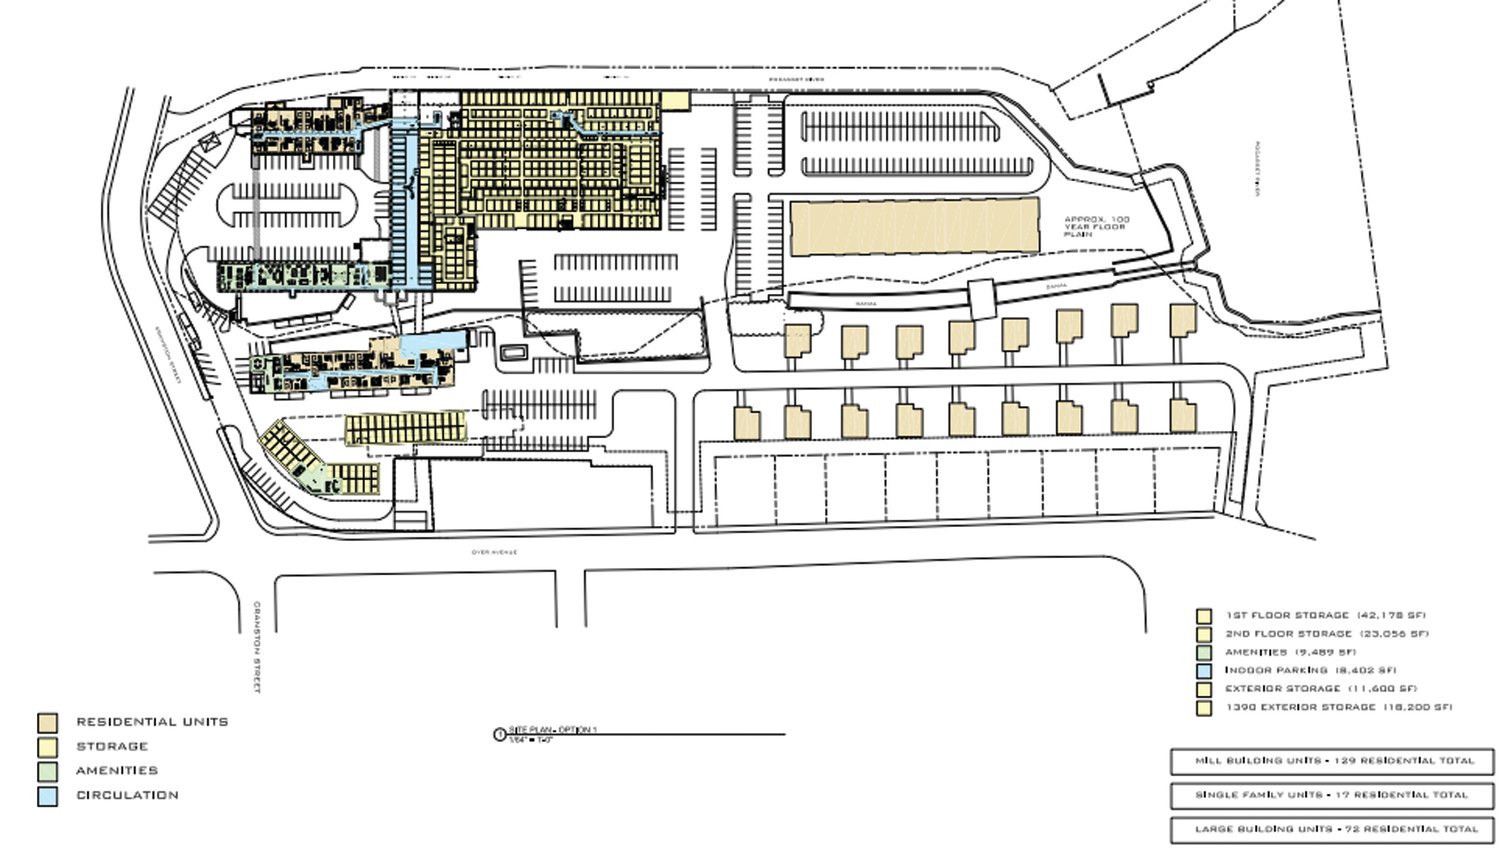 A LOOK AT THE PLAN: This image taken from the pre-application submission for the Cranston Print Works redevelopment proposal shows how various buildings – including apartments, single-family homes and self-storage space – would be situated on the main portion of the property.